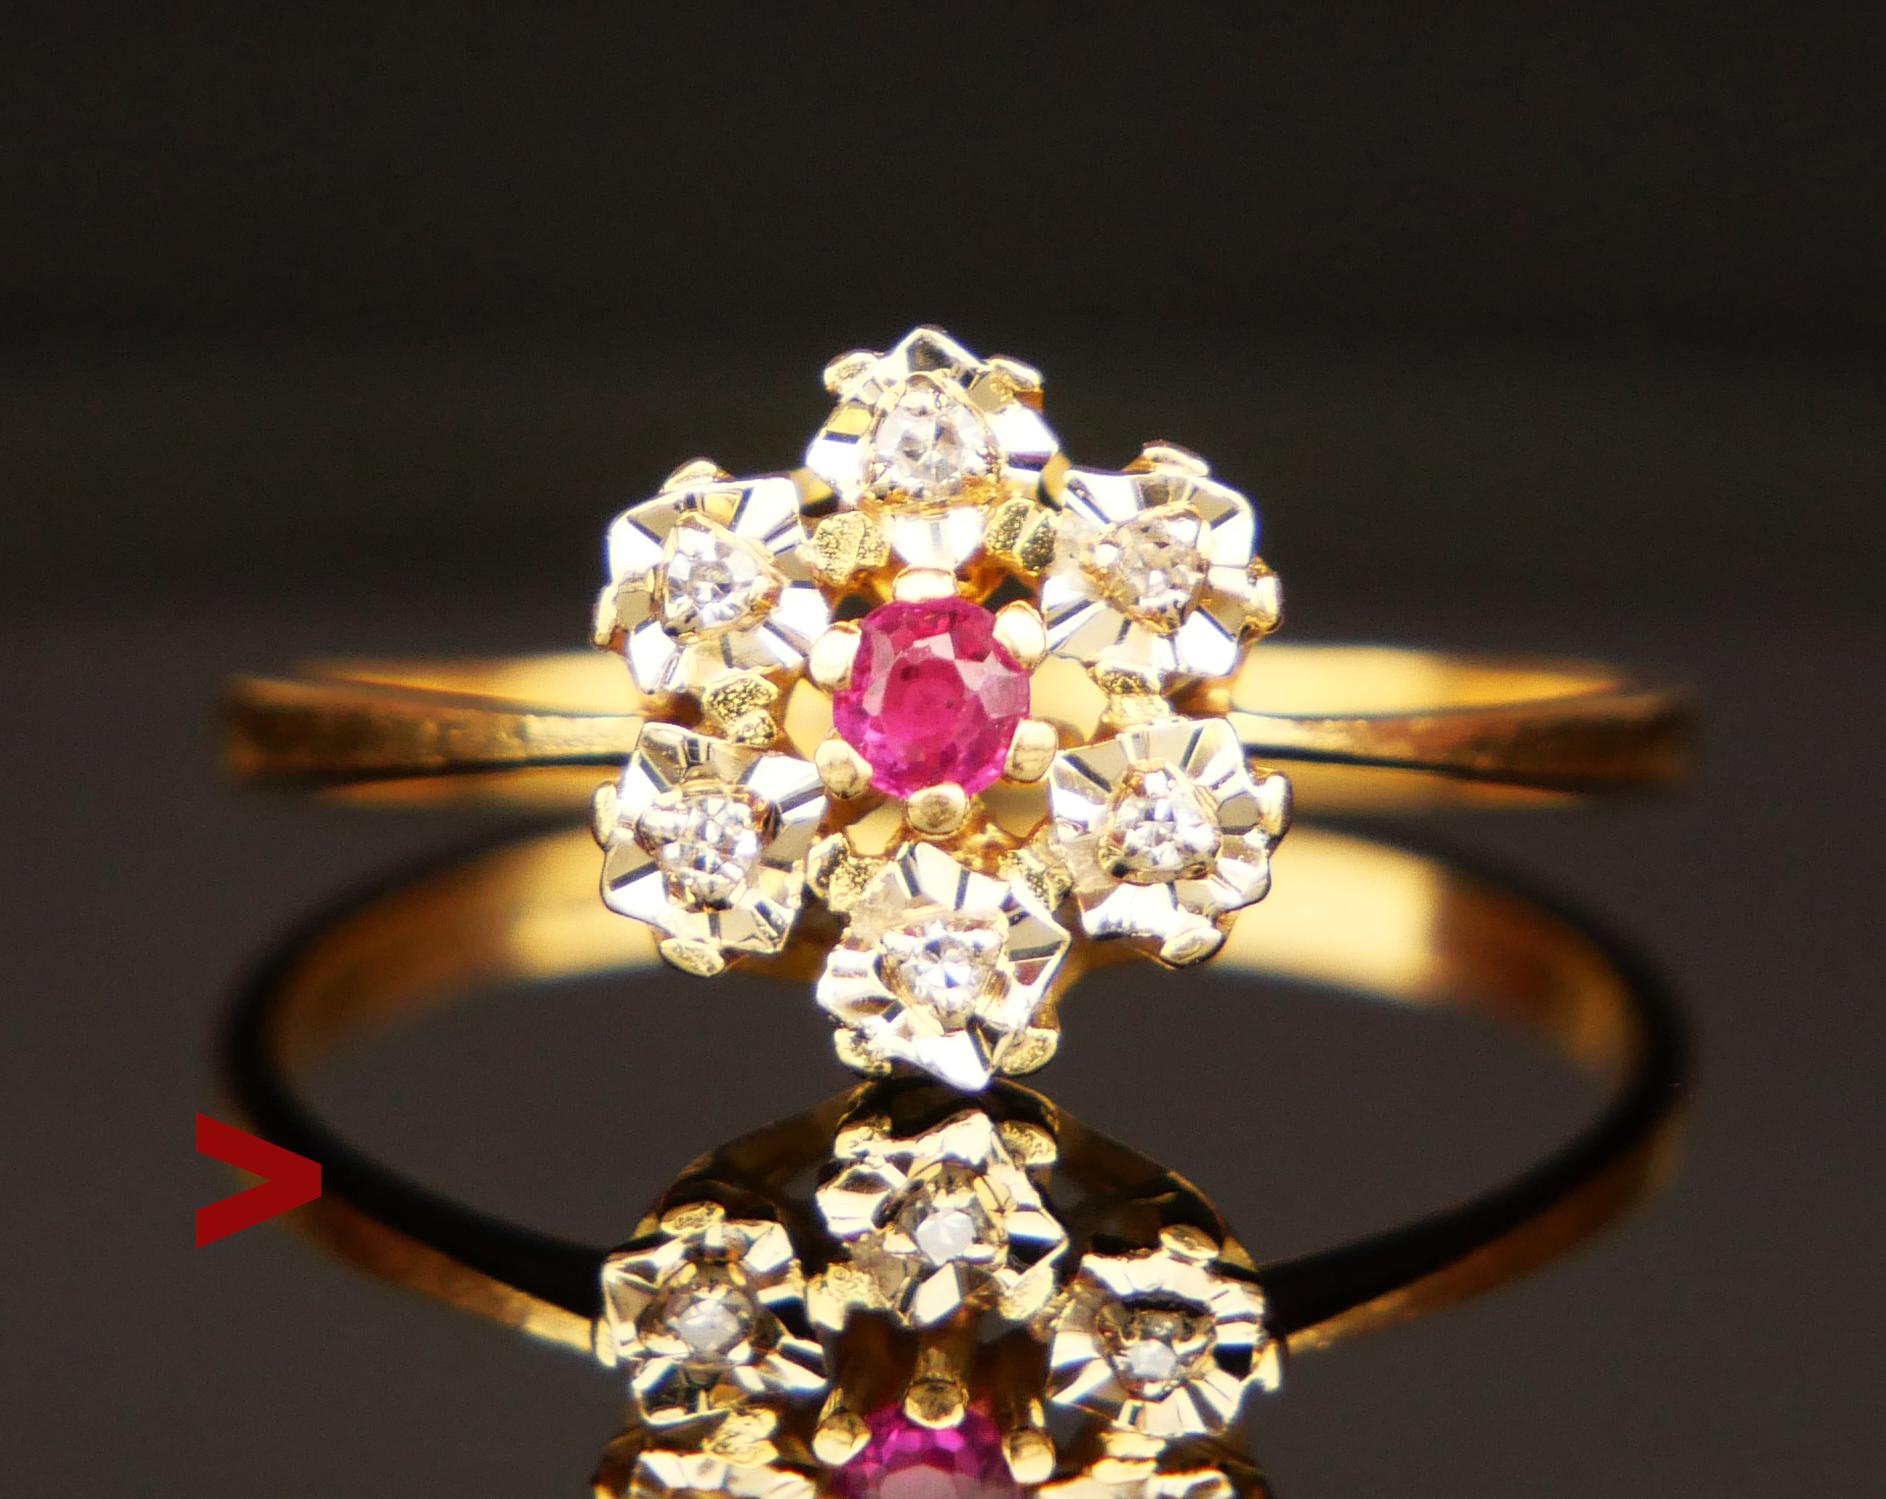 Vintage ca 1960s -1970s  European ring in solid 18K Yellow Gold with claw set diamond cut natural Red Ruby and six diamond cut Diamonds set into faceted clusters . Band hallmarked/tested solid 18K Gold.

Crown : 10mm x 6.5 mm deep. Ruby : Ø 2.5 mm /